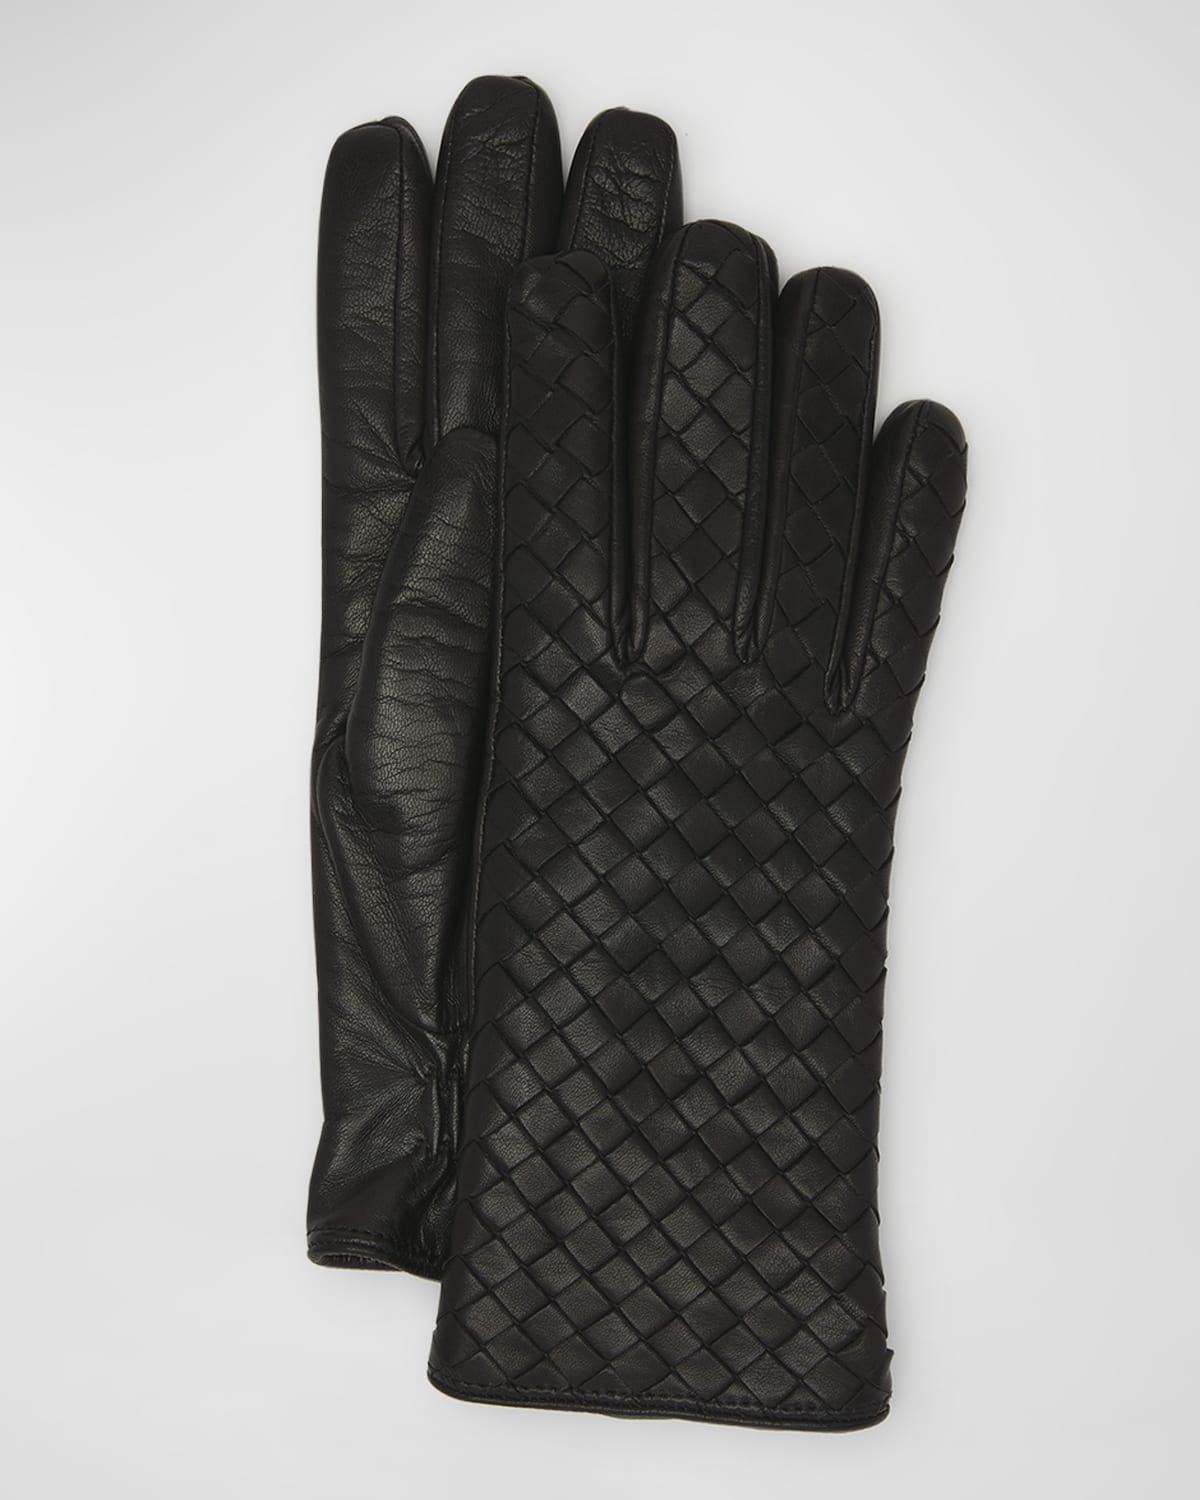 Woven Nappa Leather Gloves